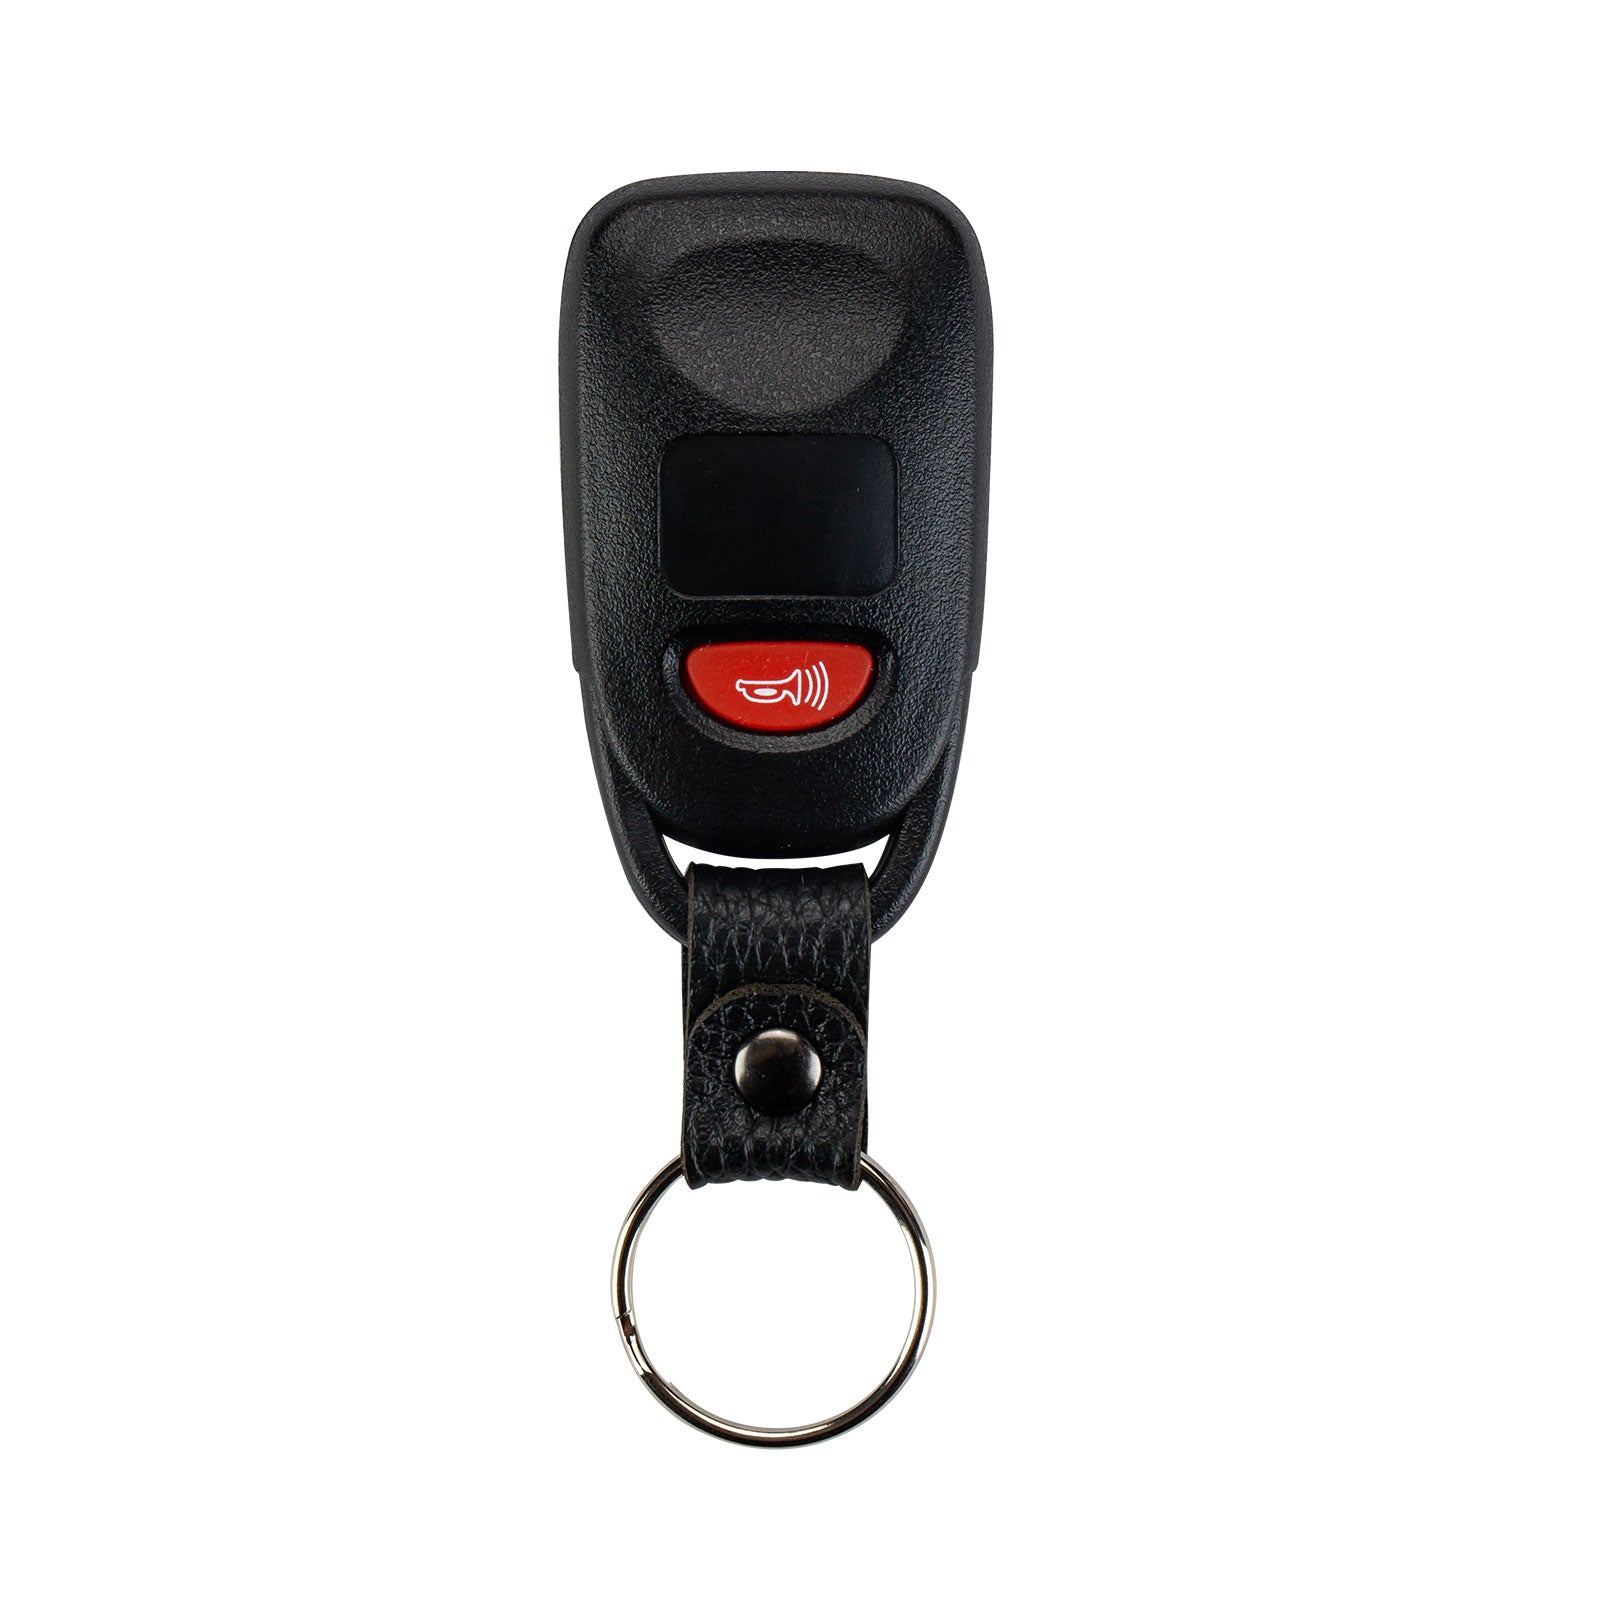 Extra-Partss Remote Car Key Fob Replacement for 2010 2011 2012 2013 2014 Kia Forte PINHA-T008